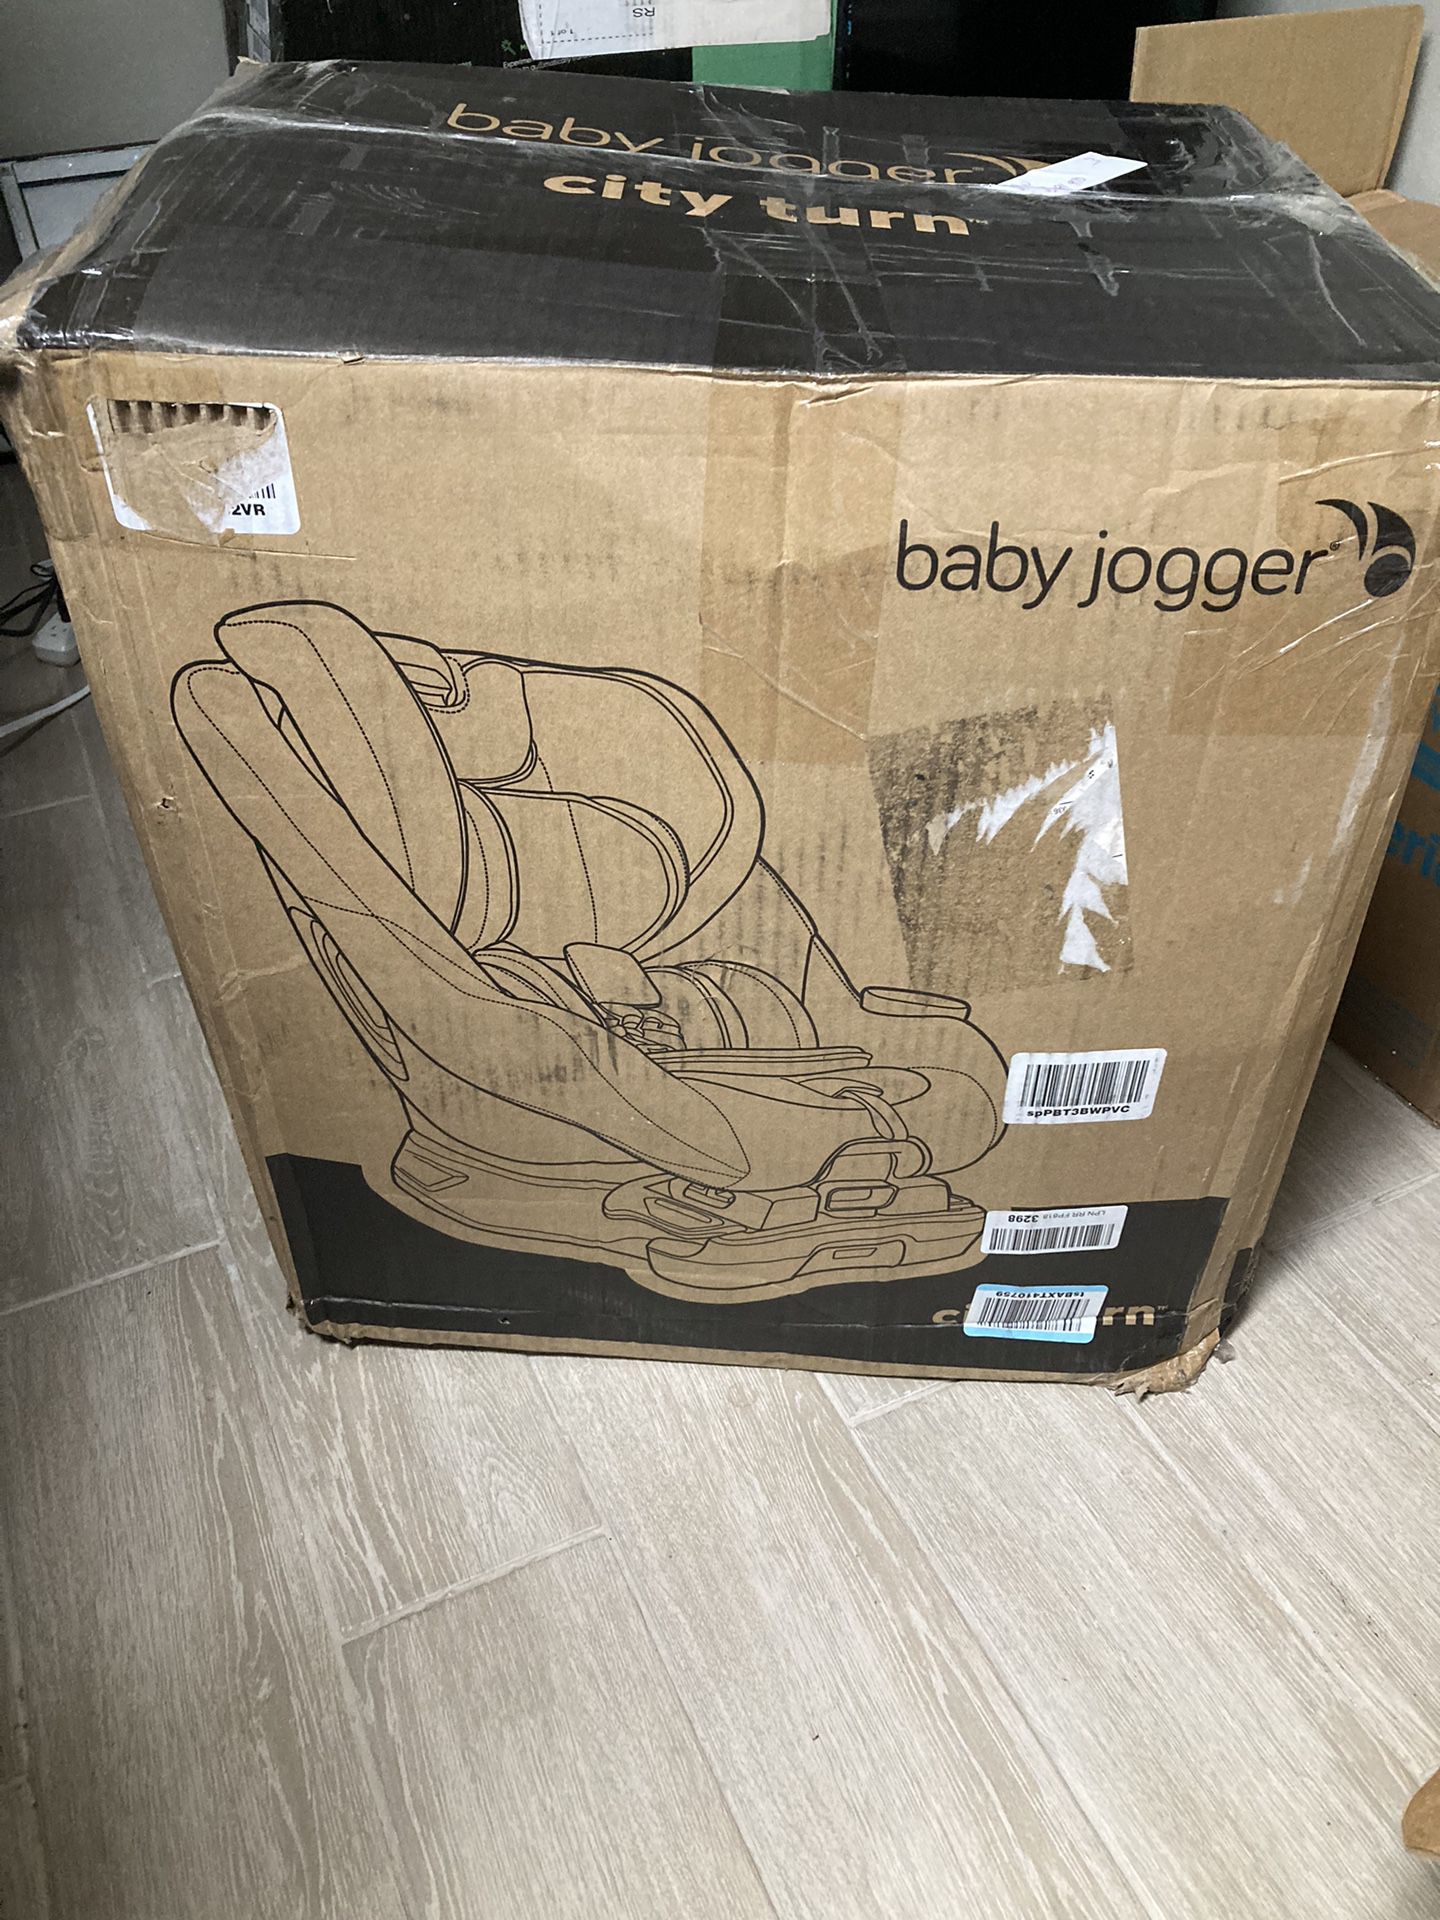 Baby Jogger Car Seat (open boxed New)